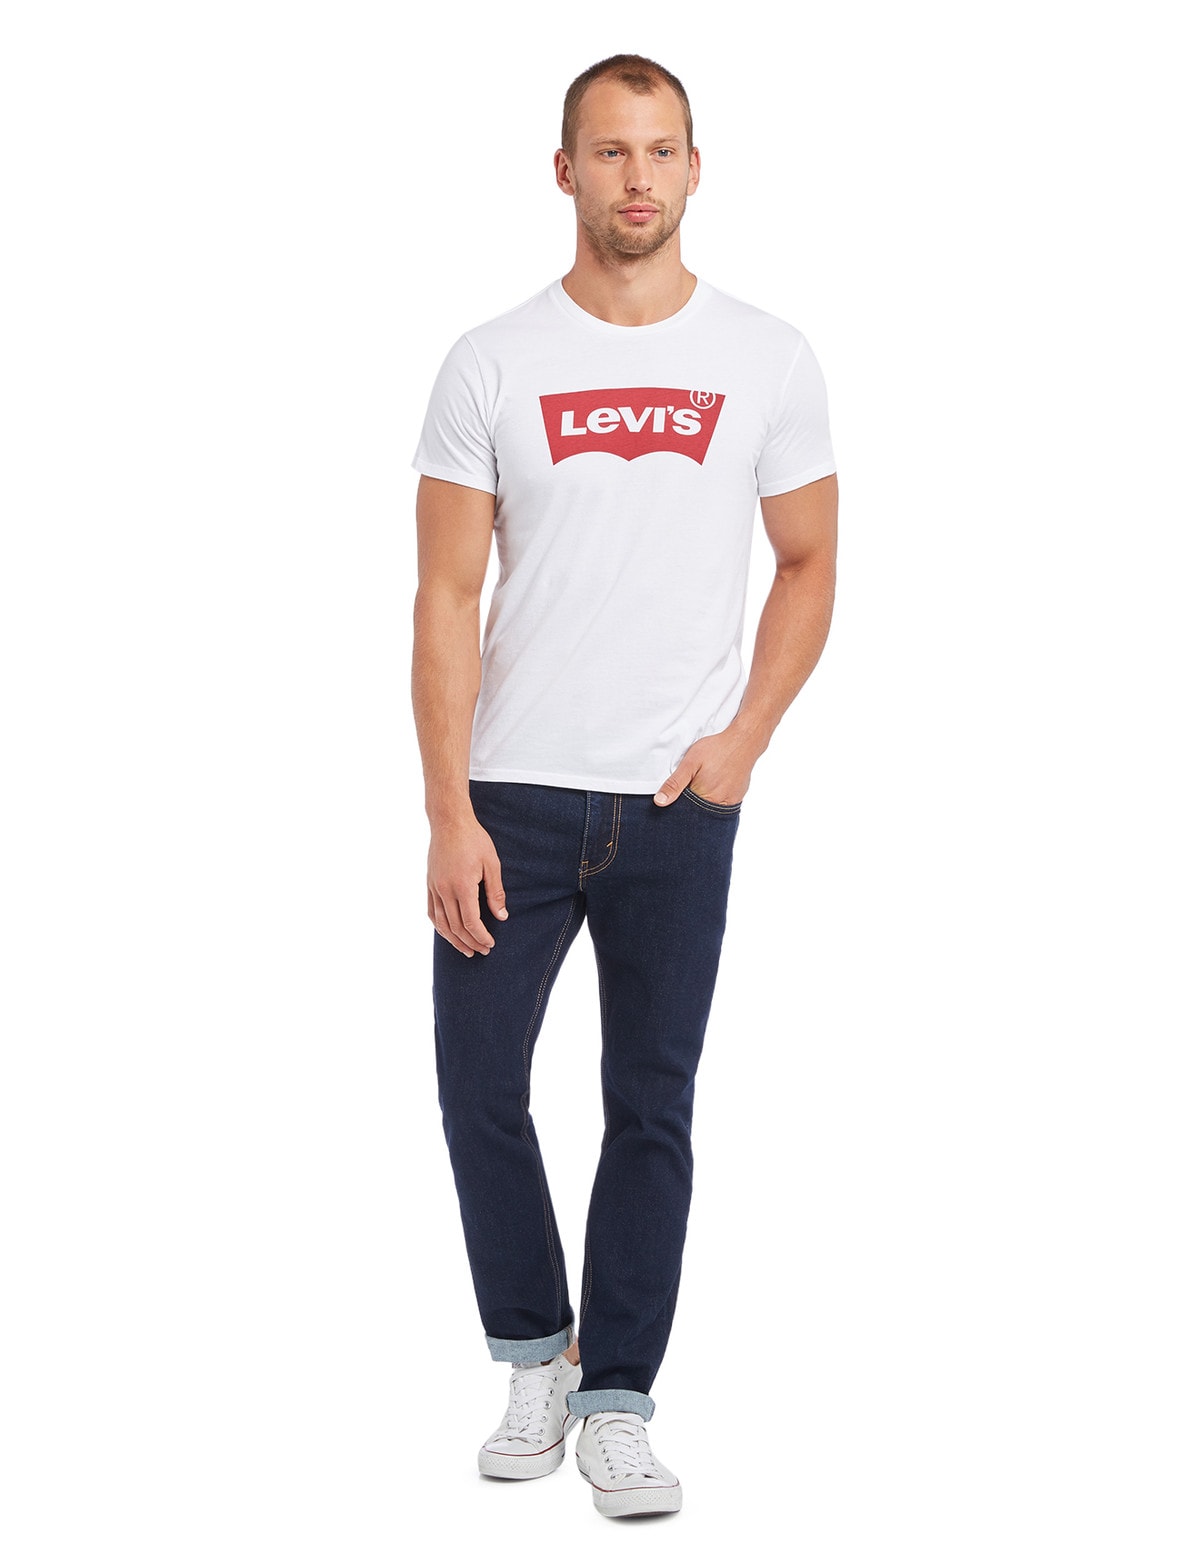 Levis Batwing Graphic Print Short-Sleeve Tee, White - T-shirts, Singlets &  Polos